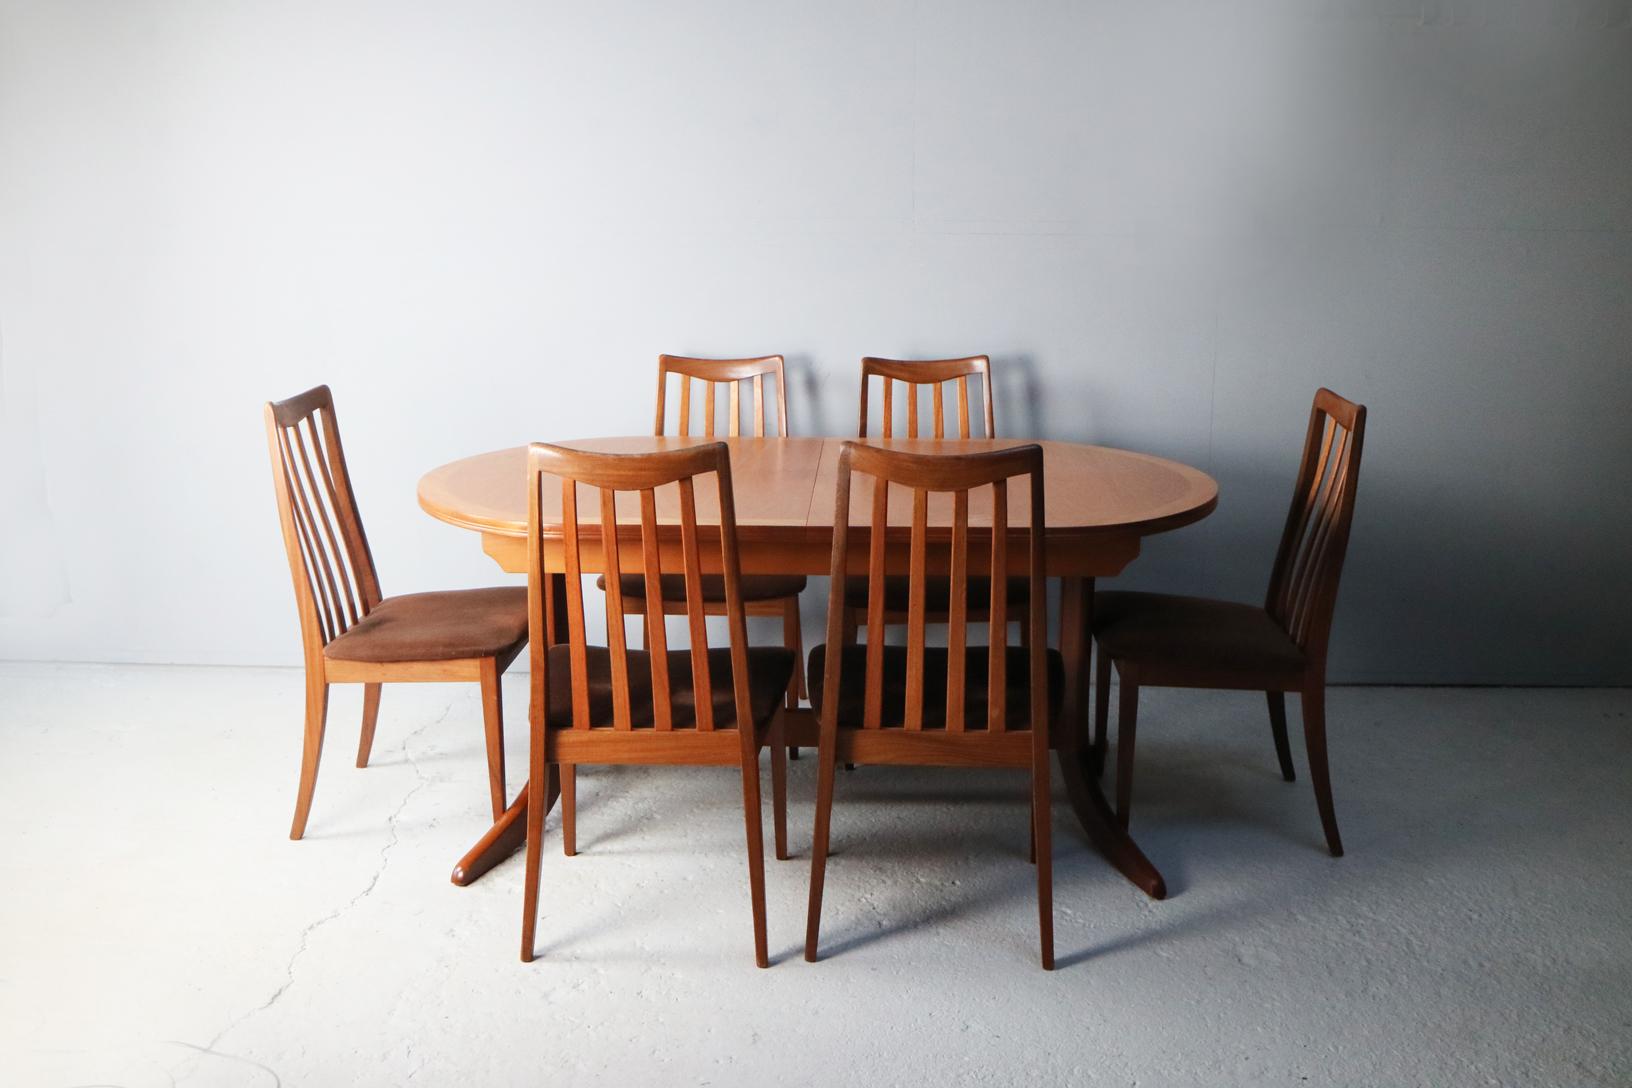 A large Nathan extending dining table in excellent condition, and 6 G Plan chairs with brown velour original seating and distinctive back rests.

Measures: Table: width extended 208cm x width unextended 162.5cm depth 104cm x height 74cm
Chairs: